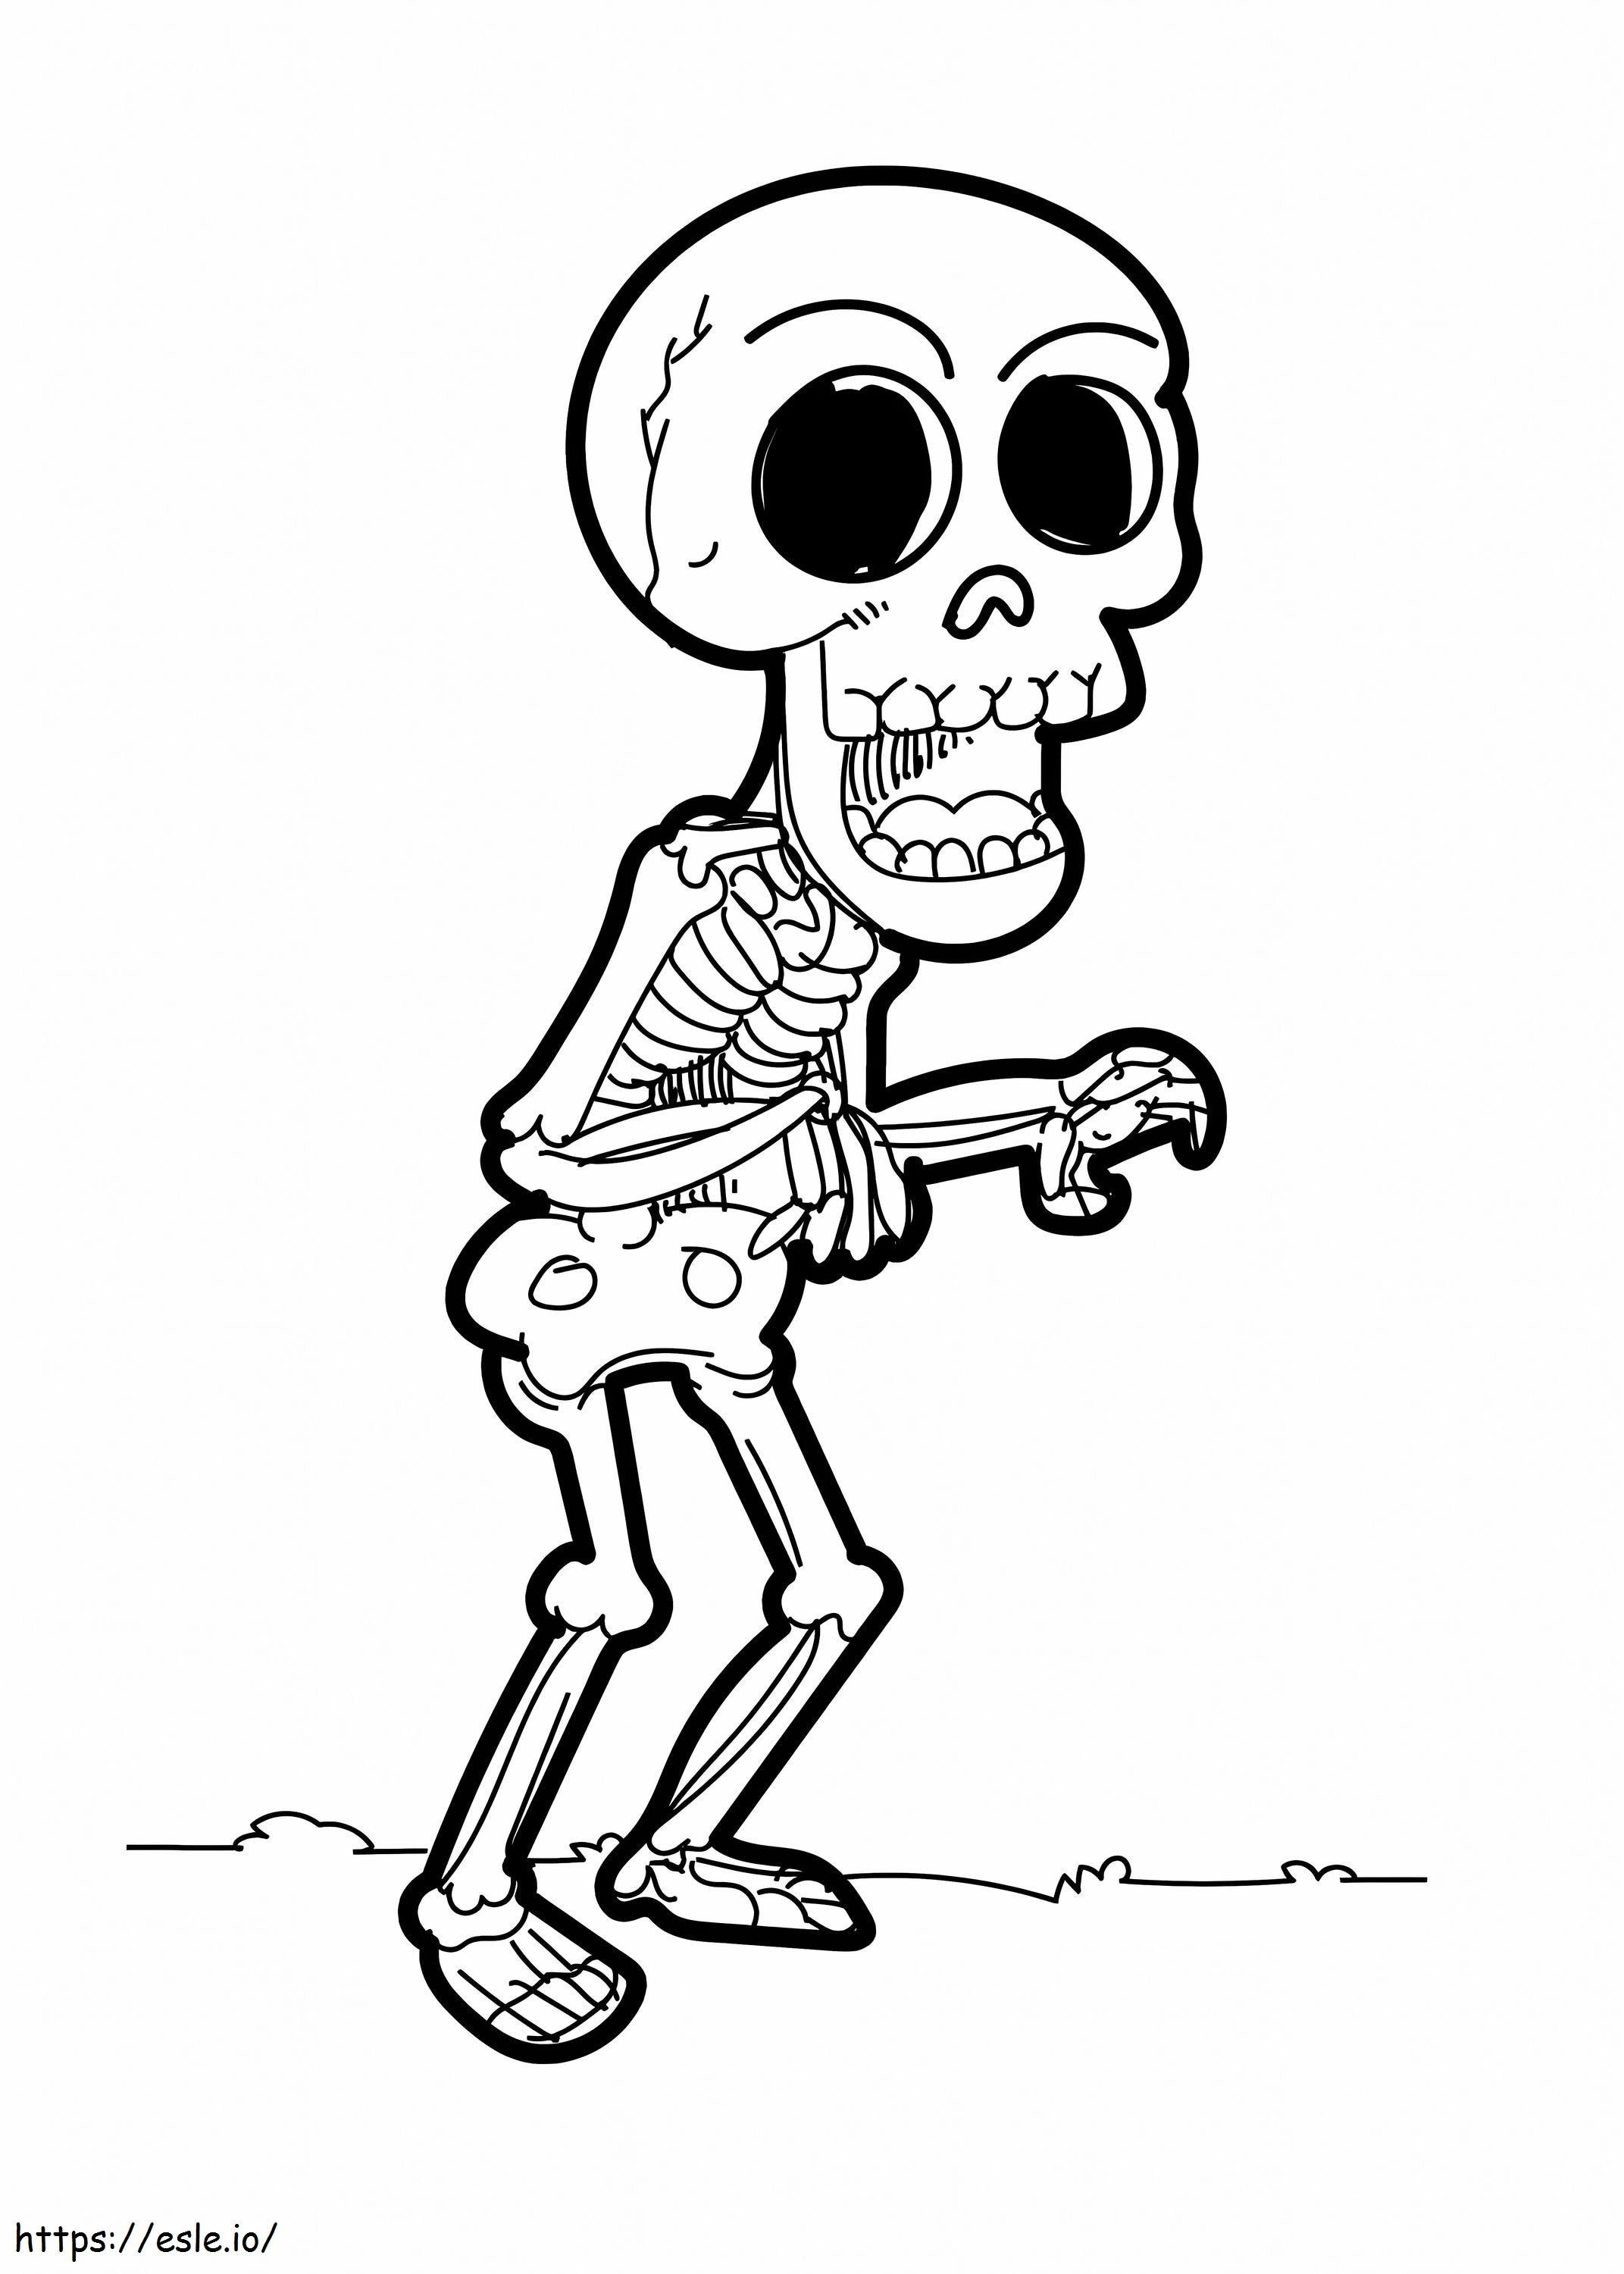 Adorable Skeleton coloring page